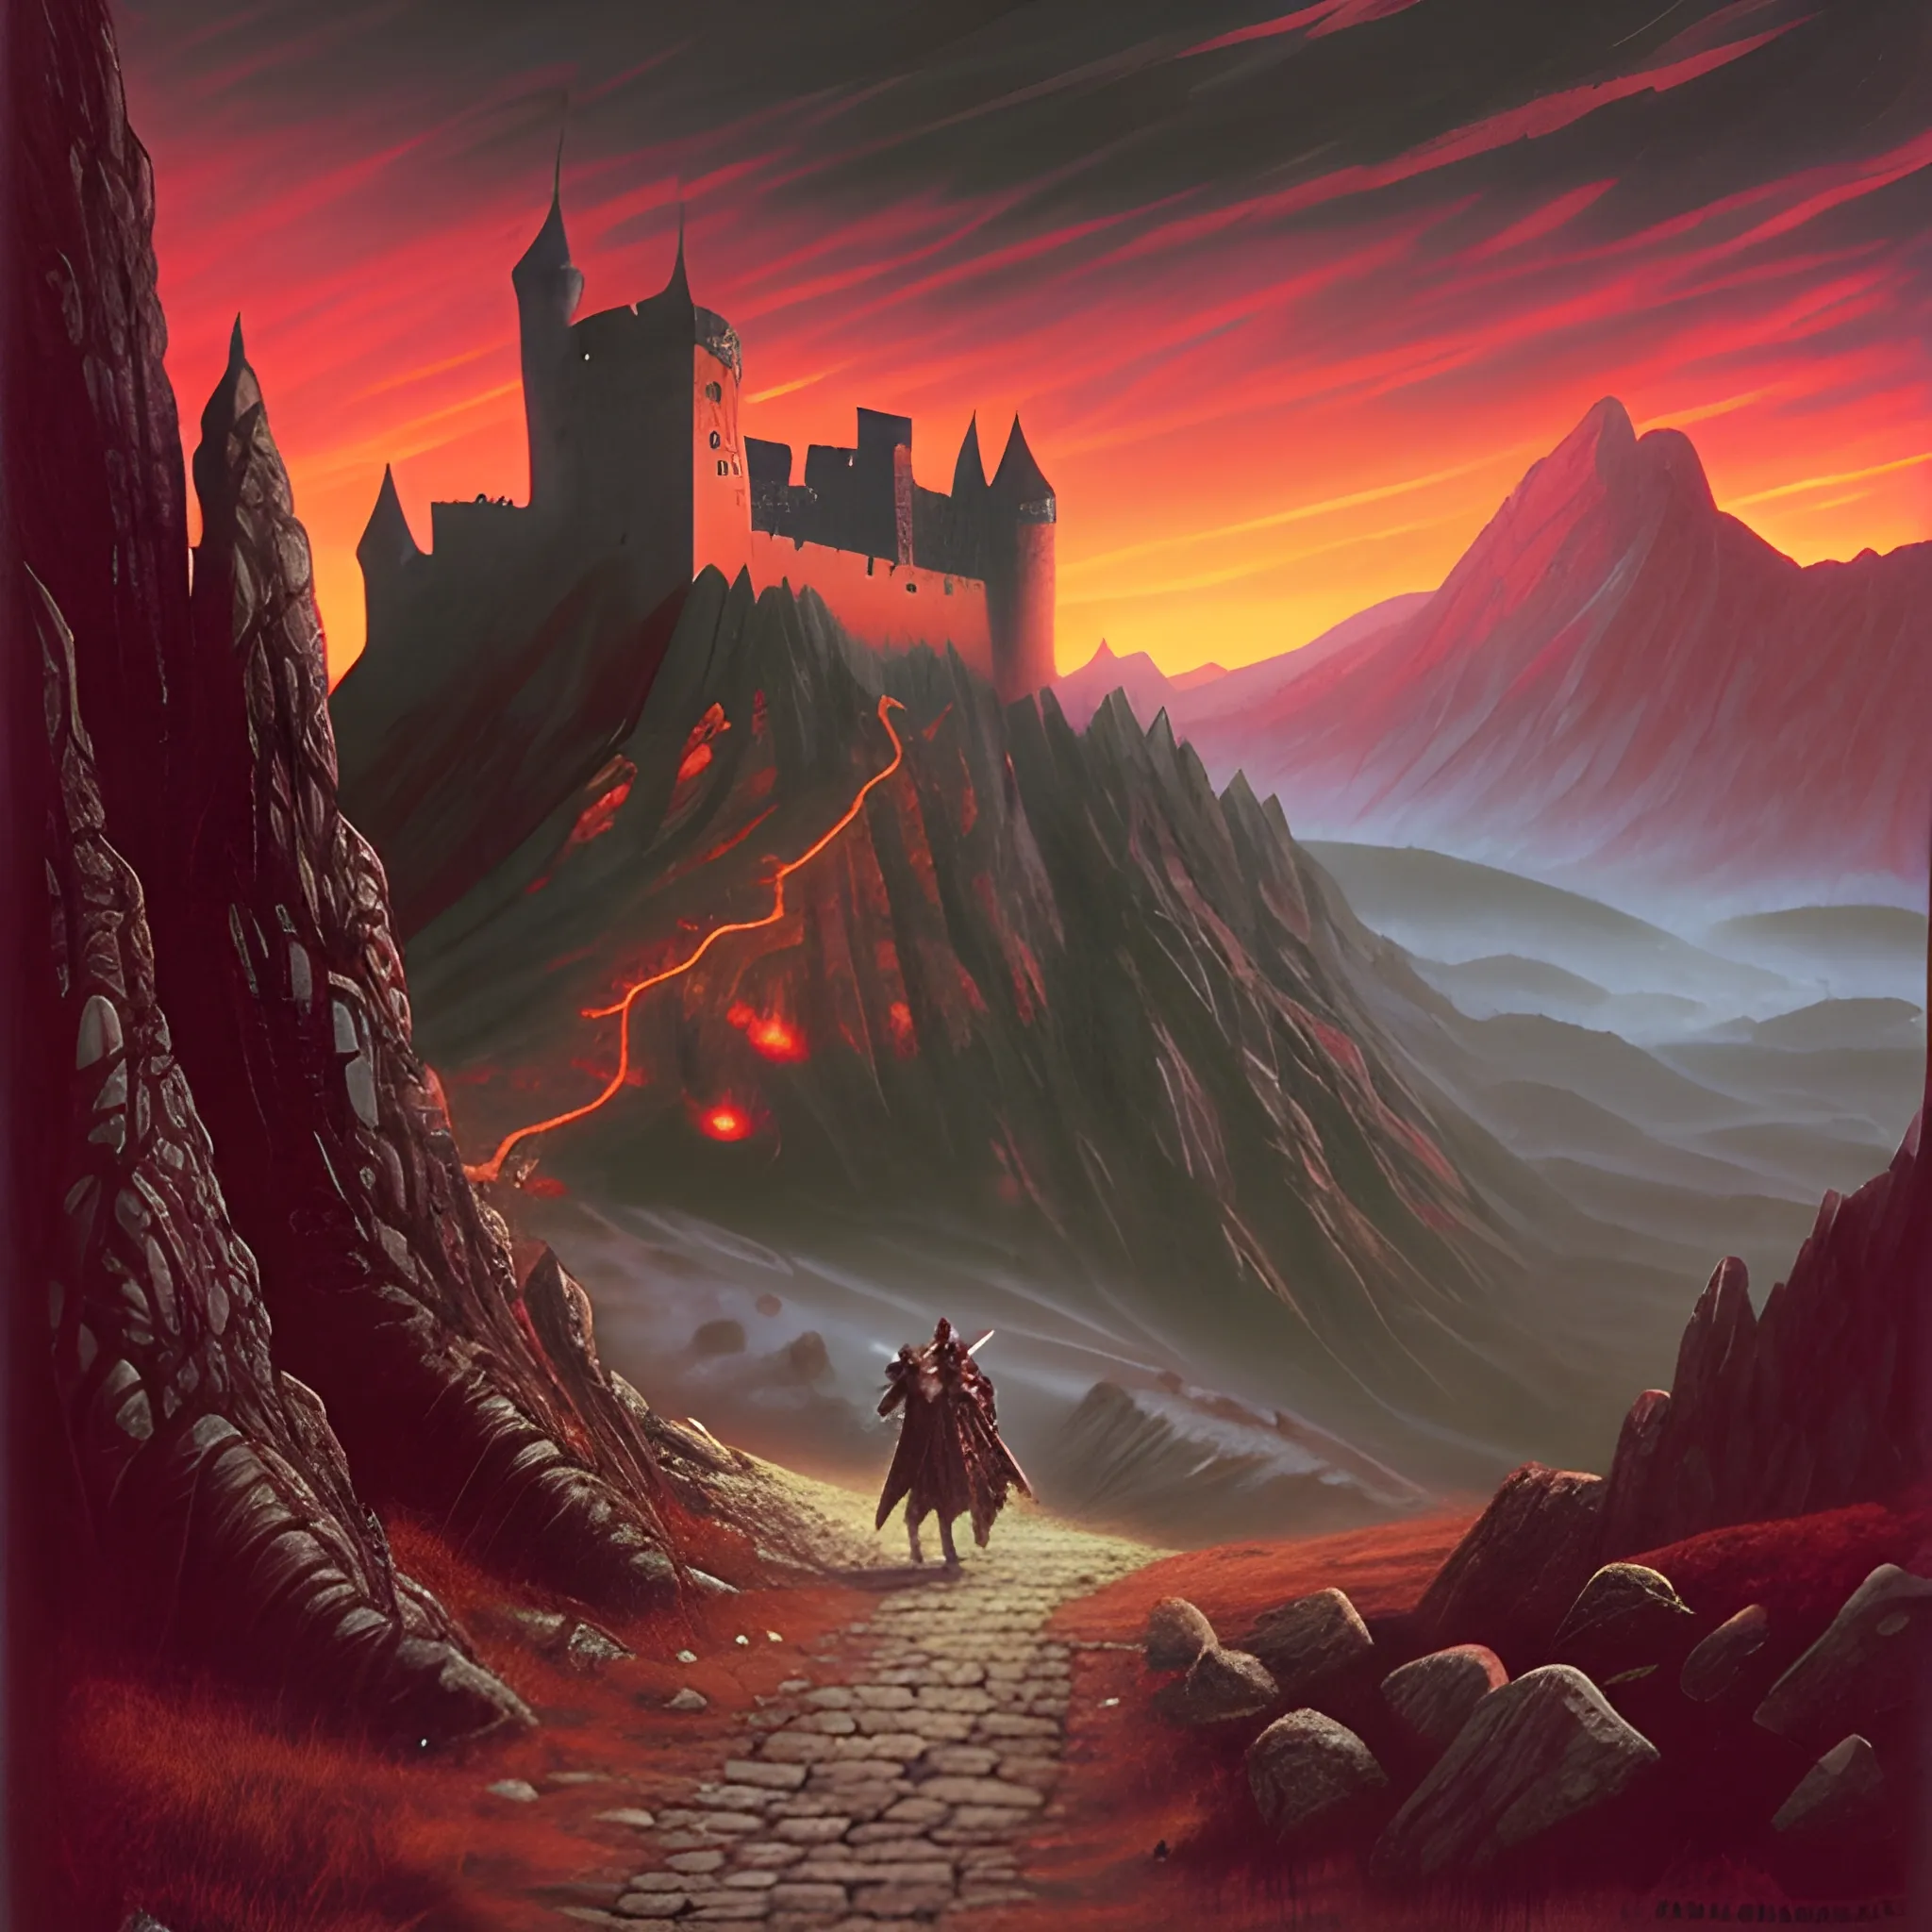 80s dark fantasy art, medieval knight walking in a mountain pass, dark red sky, castle in the distance